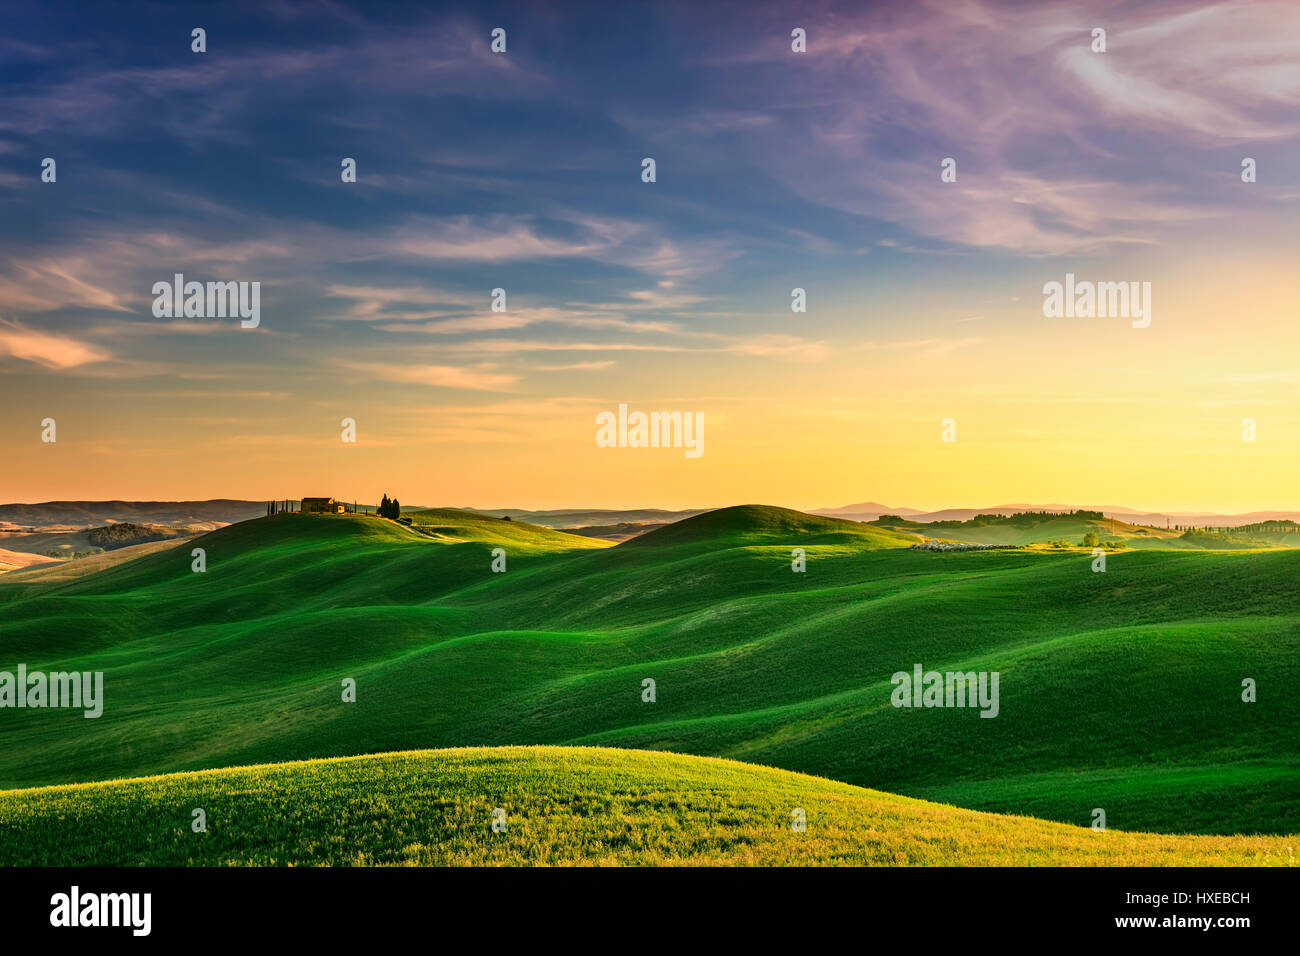 Tuscany, rural landscape in Crete Senesi land. Rolling hills, countryside farm, cypresses trees, green field on warm sunset. Siena, Italy, Europe. Stock Photo